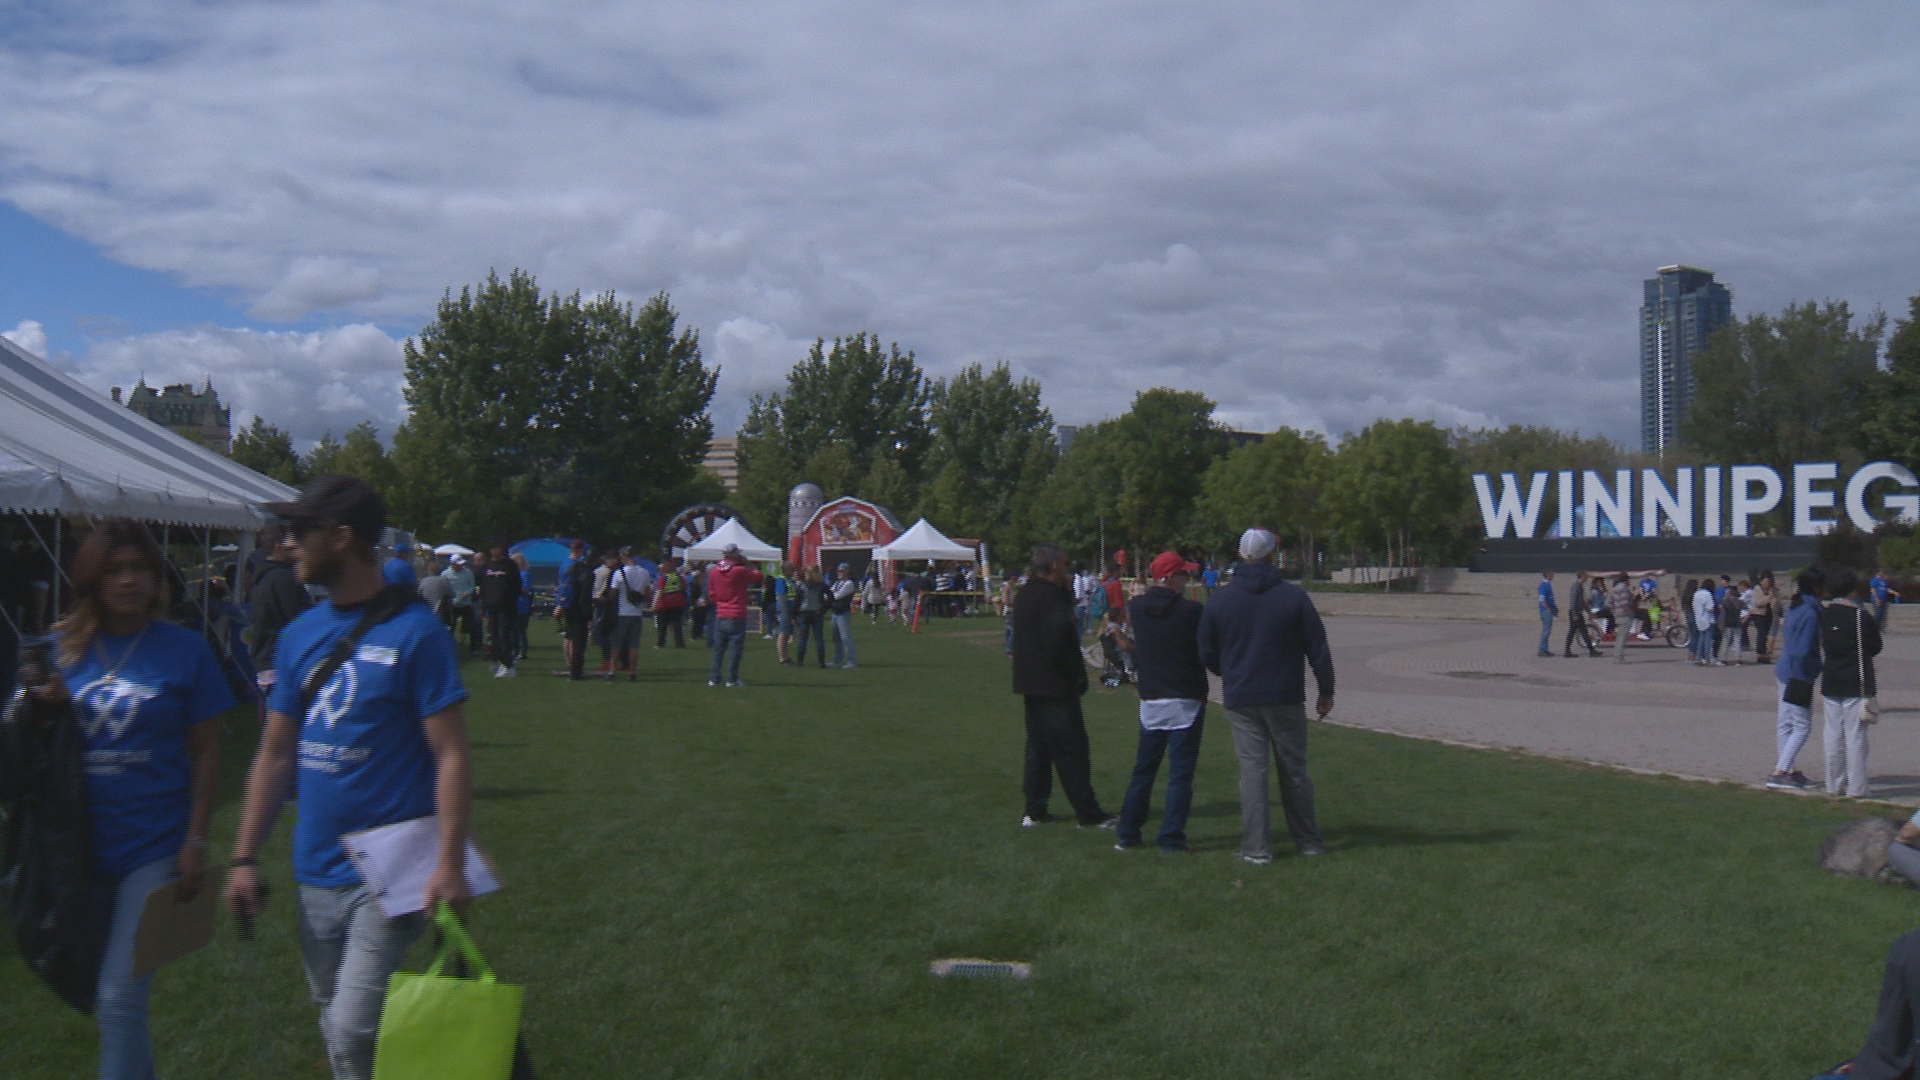 Manitoba organizations advocating for mental health and addictions resources hosted their first in-person Recovery Day at The Forks in Winnipeg since the pandemic began. They're hoping to build awareness and challenge the stigma that prevents some from seeking help.